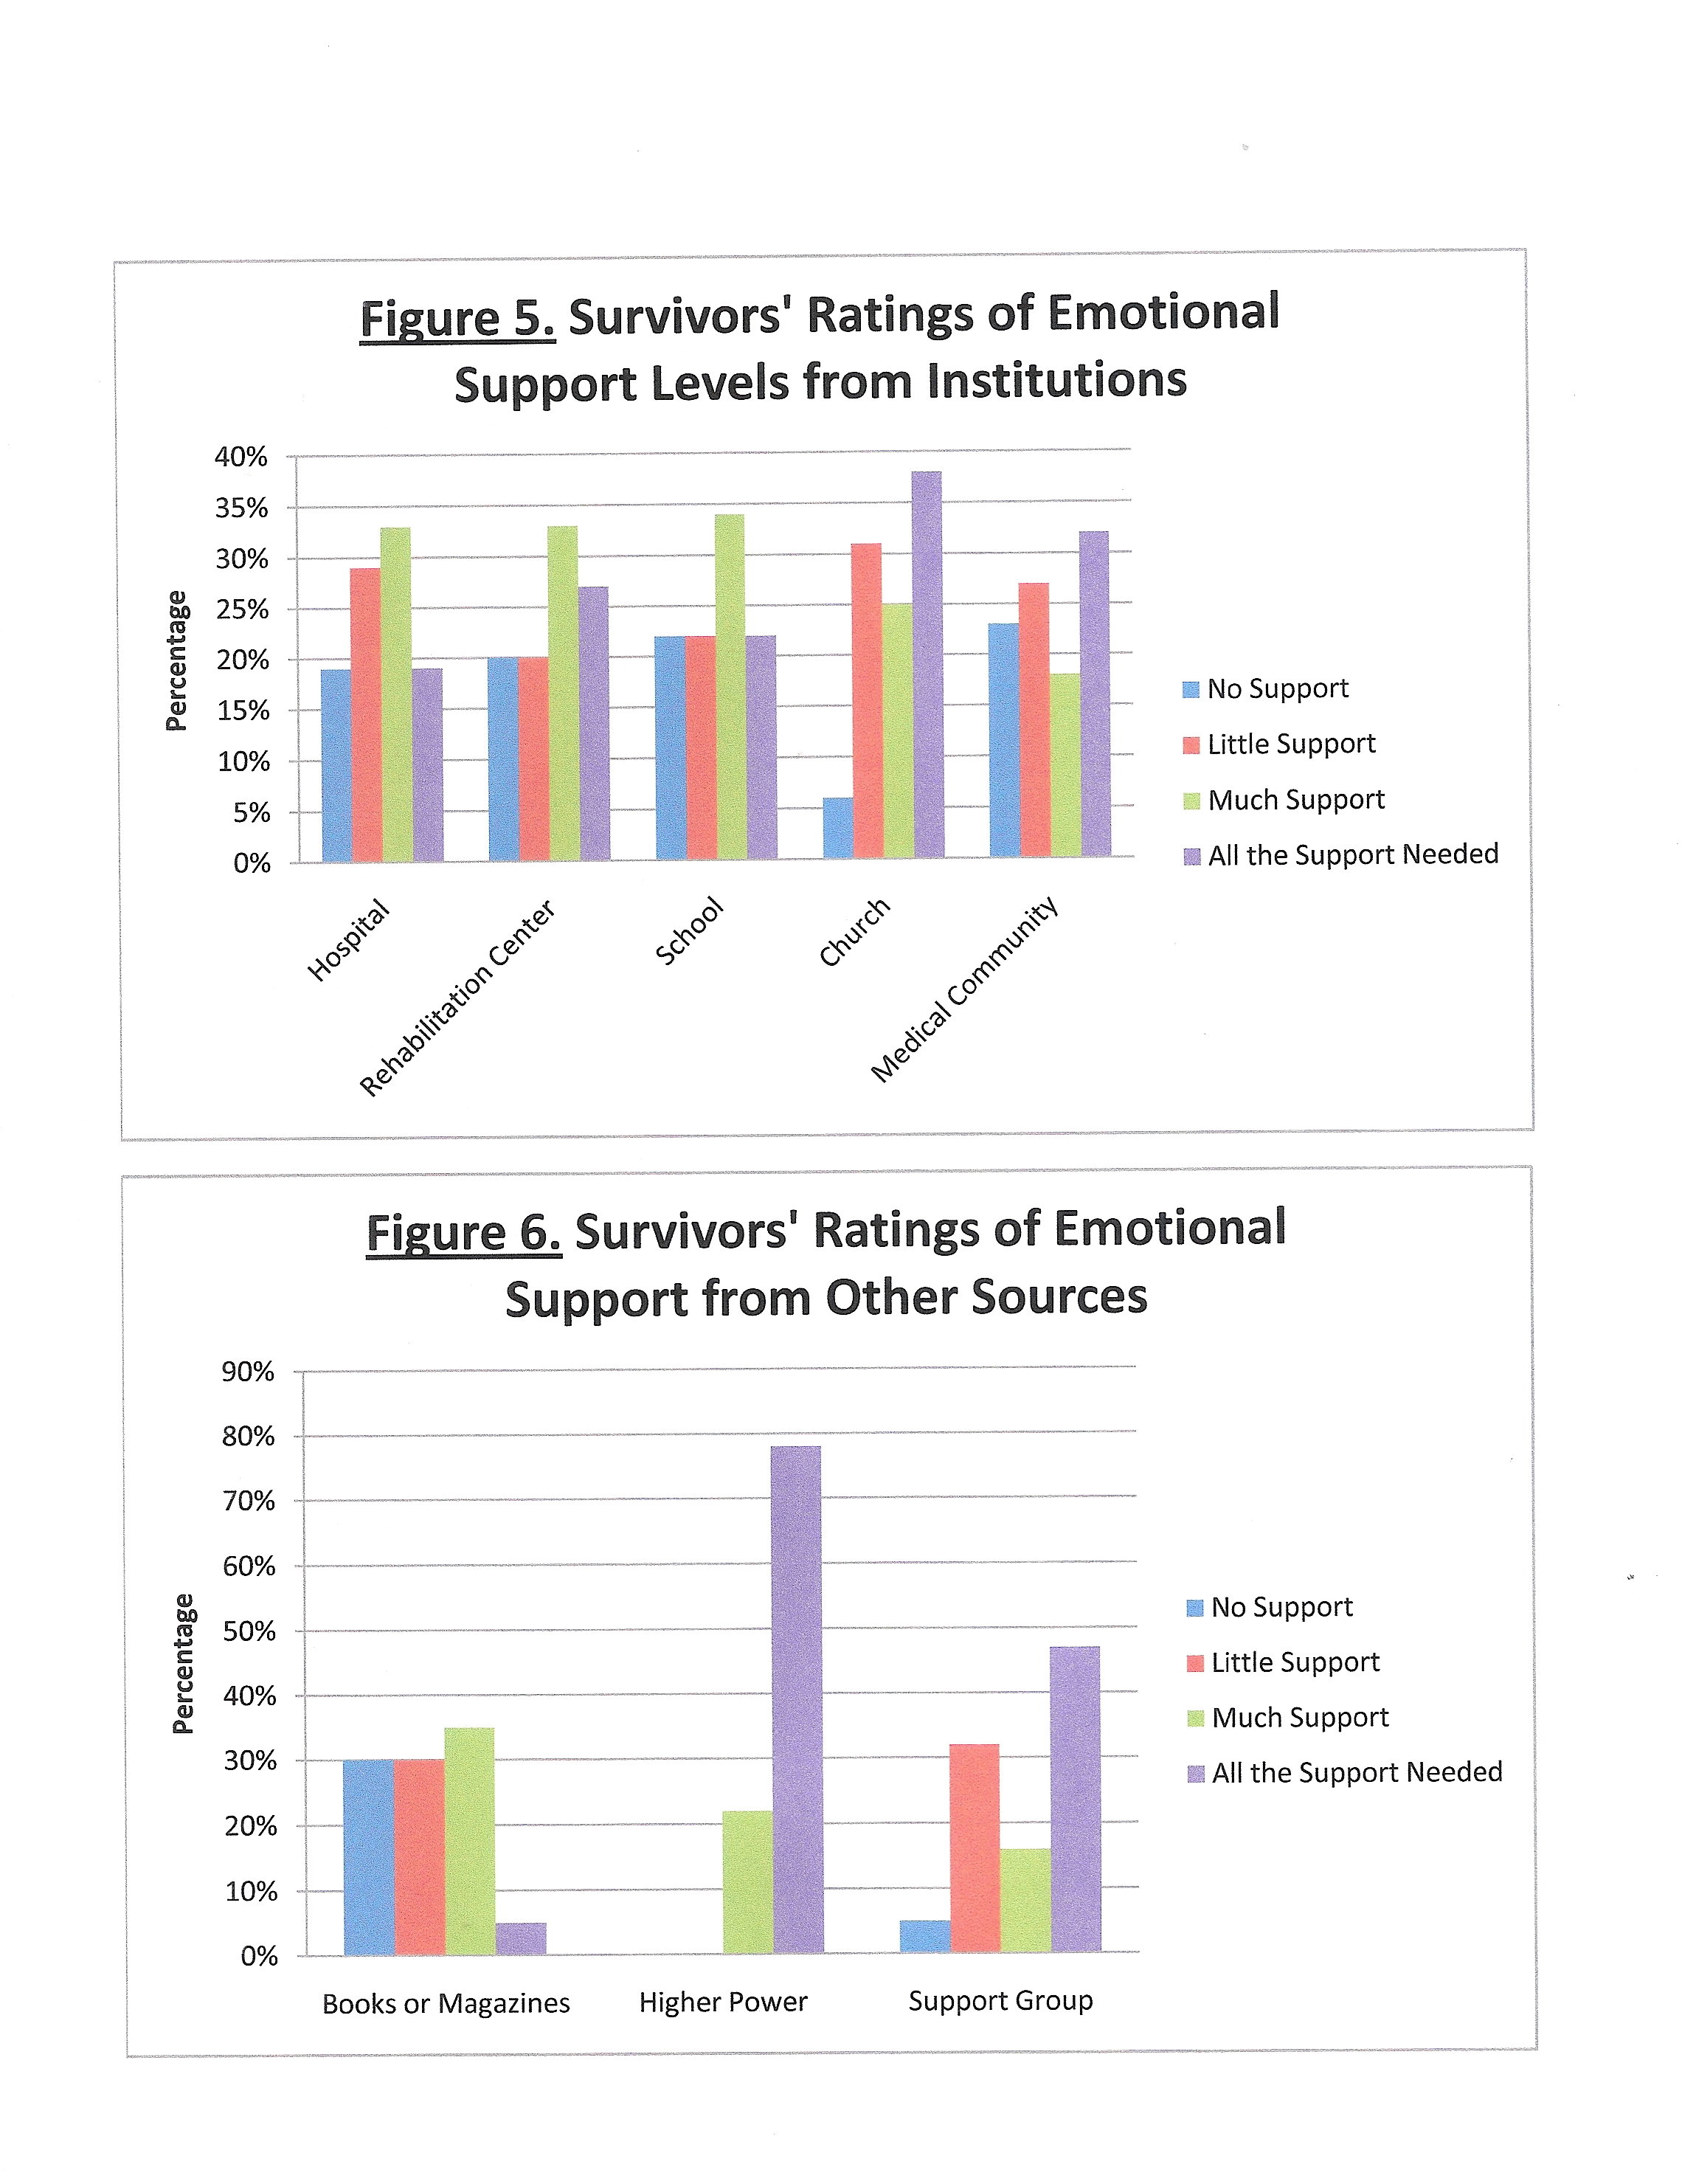 Survivors' Ratings of Emotional Support from Institutions and Other Sources